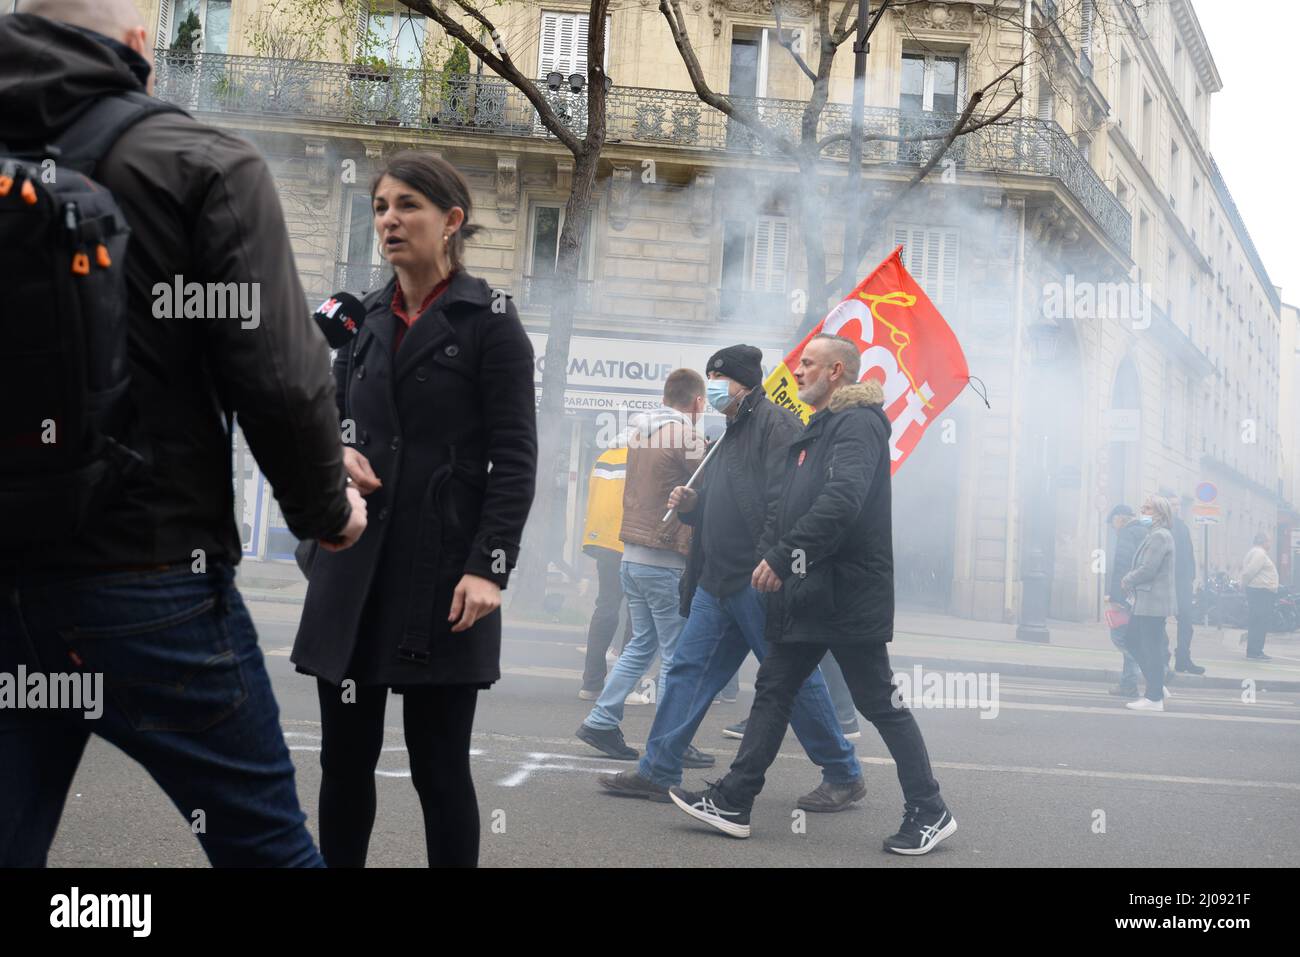 Inter-professional mobilisation in Paris on the call of the CGT and UNSA for wage increases. About 5000 people marched from the Place de la République Stock Photo